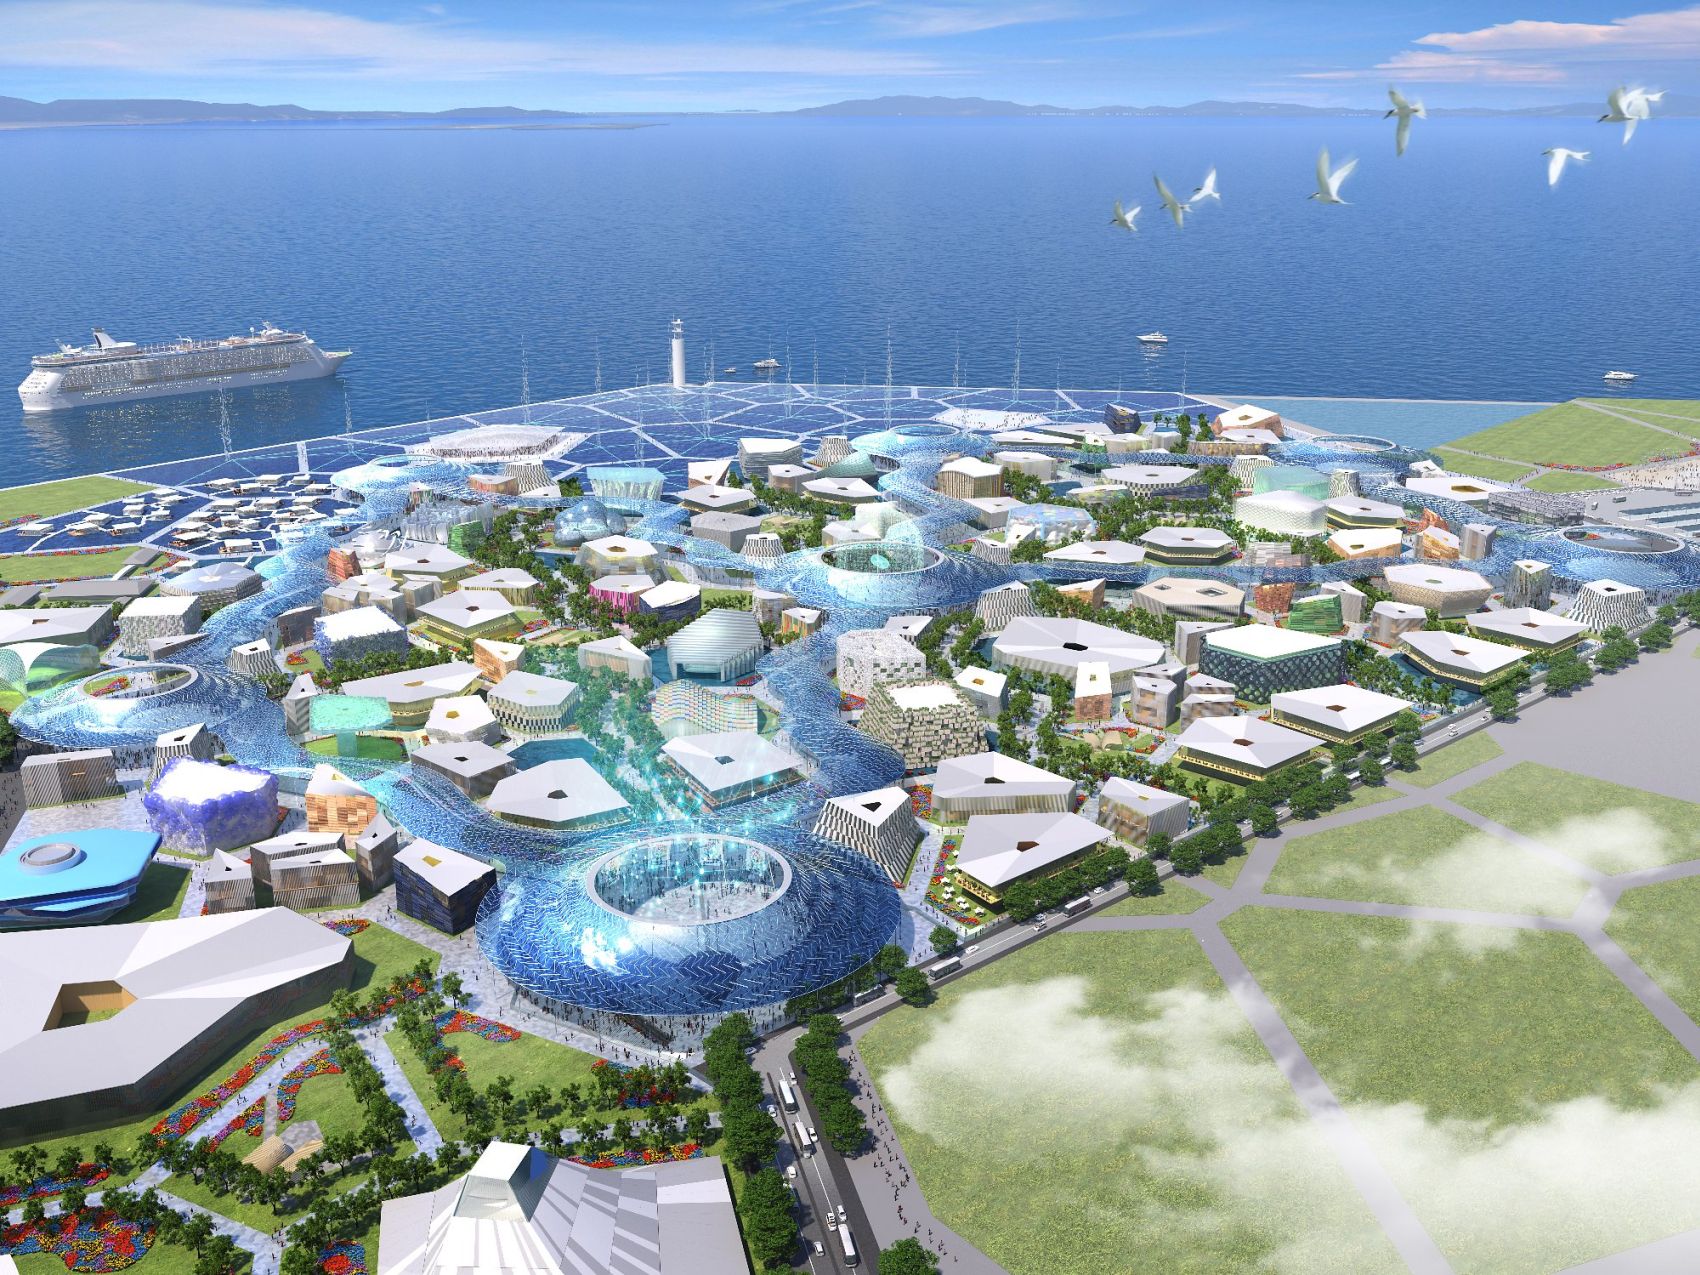 World Expo 2025: Here’s How Osaka Will Bring Back the Crowds